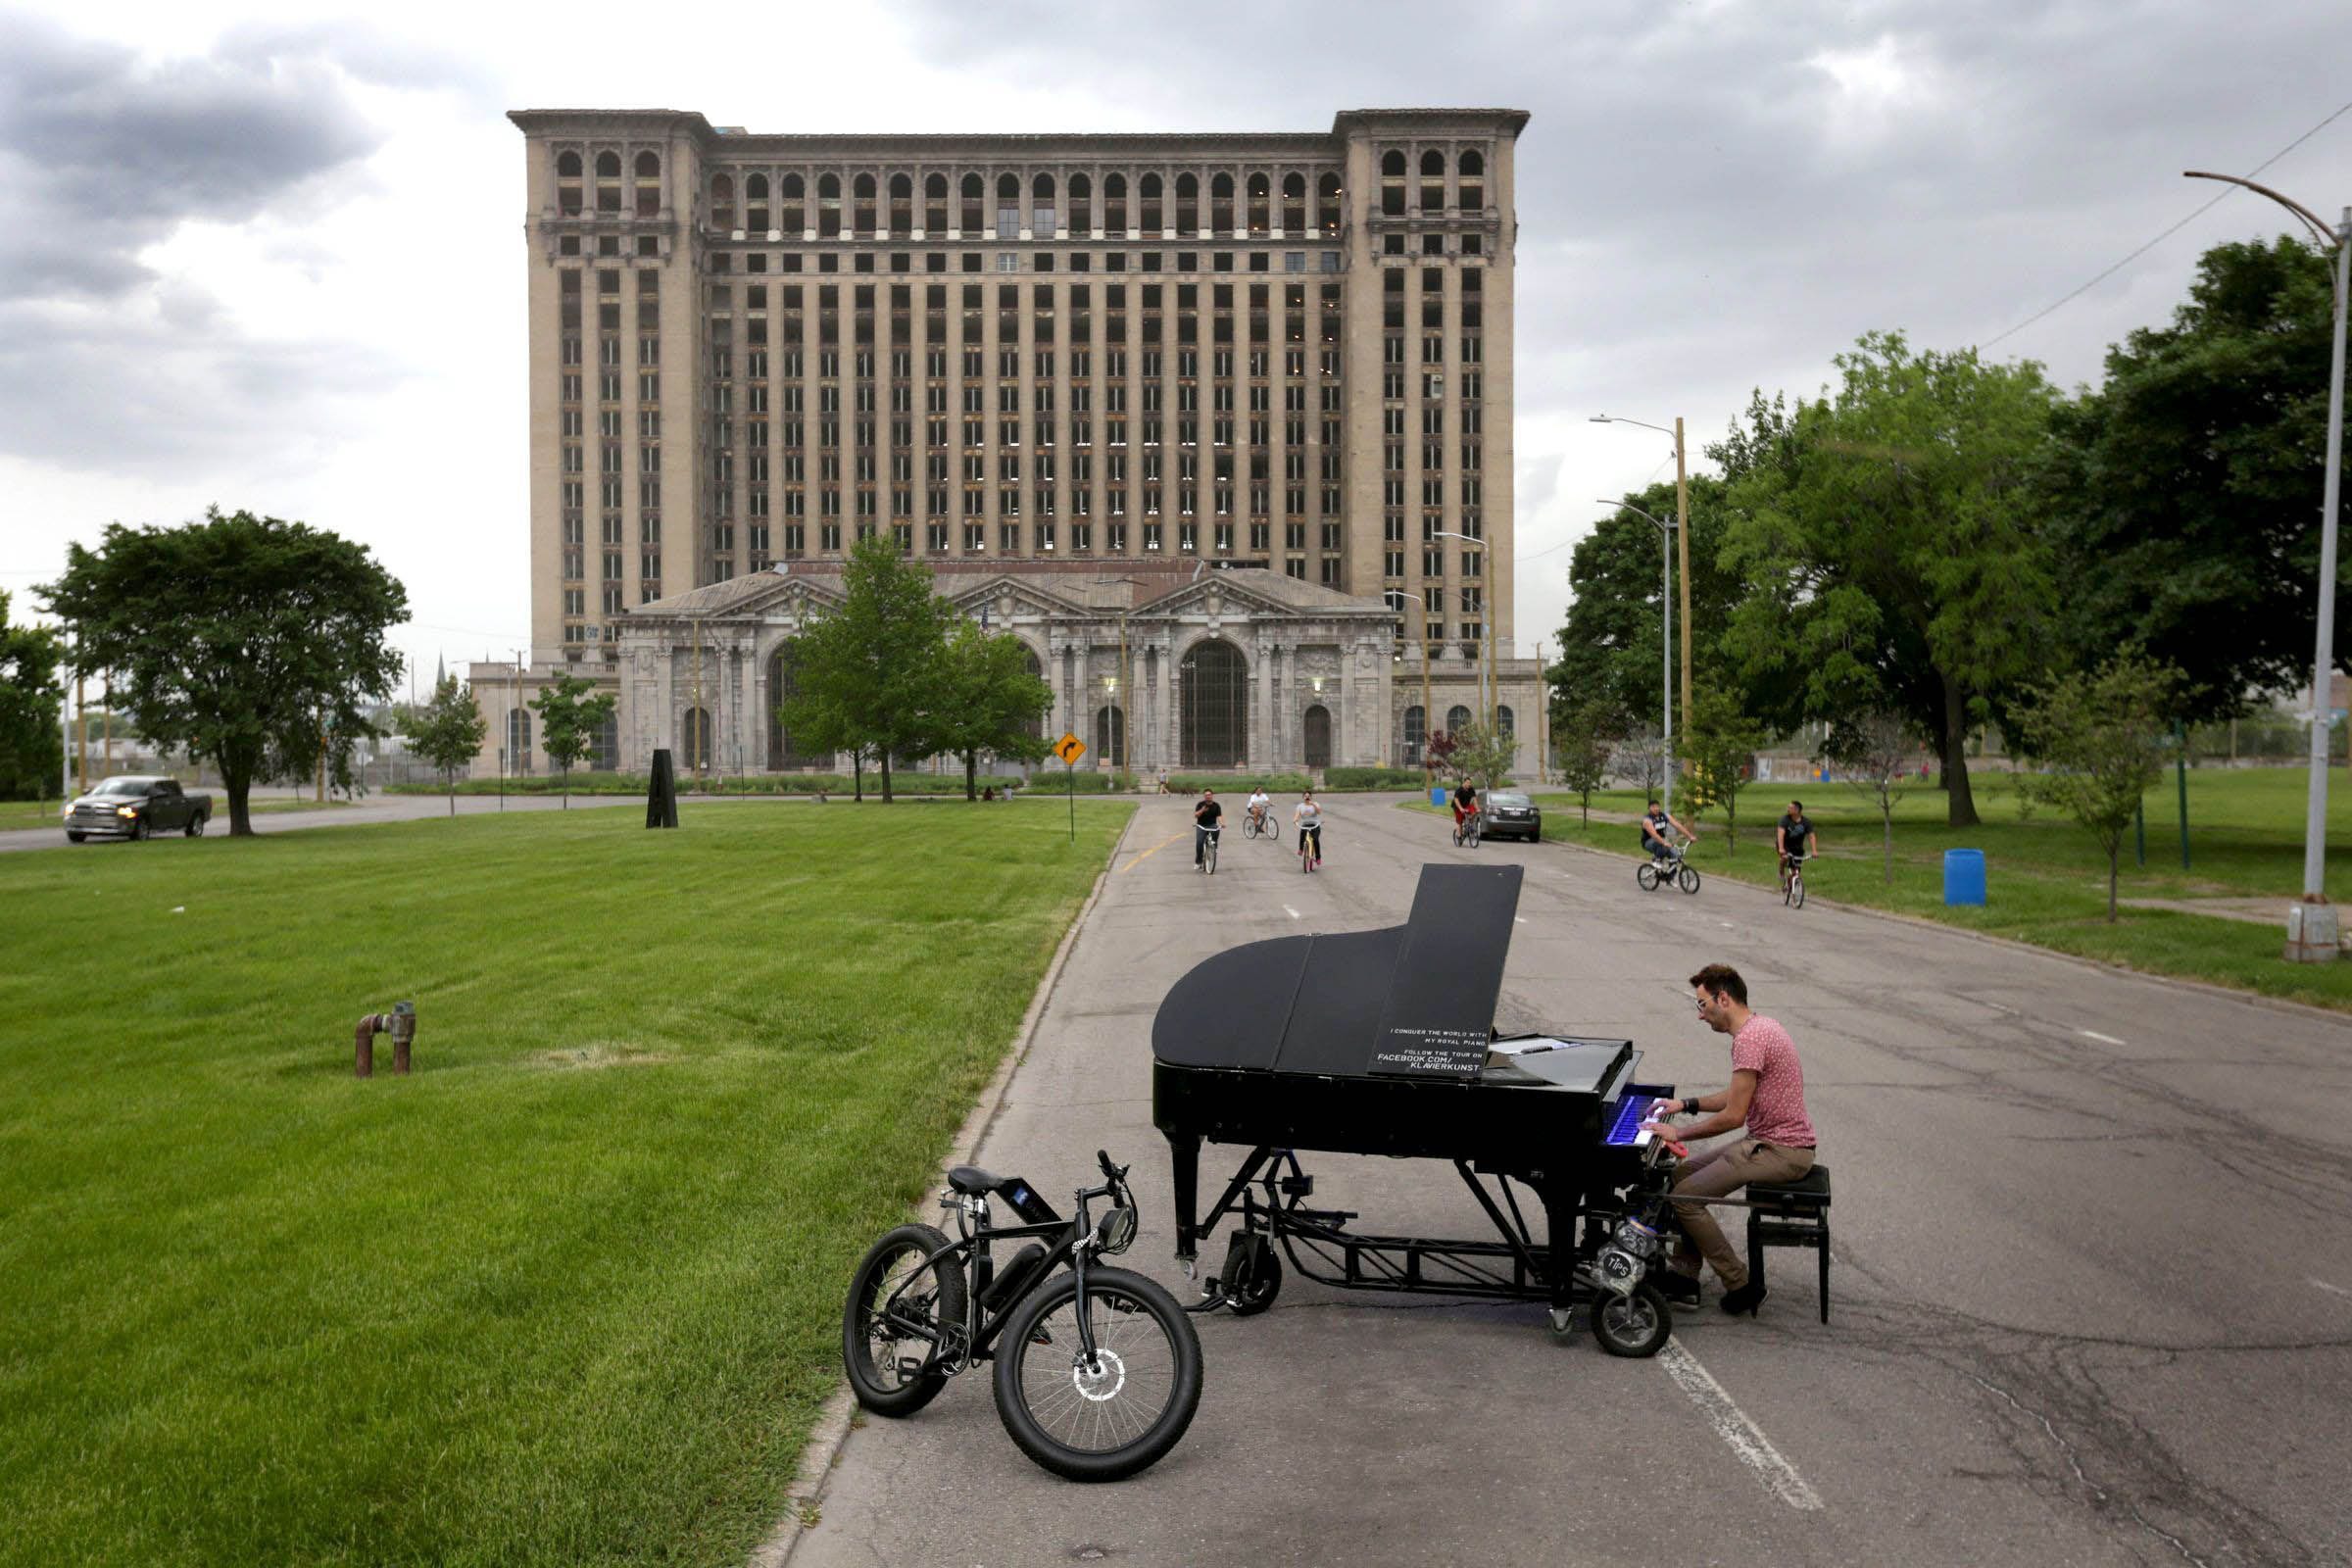 From Eminem video to Batman movie: Michigan Central Station has had many pop culture roles